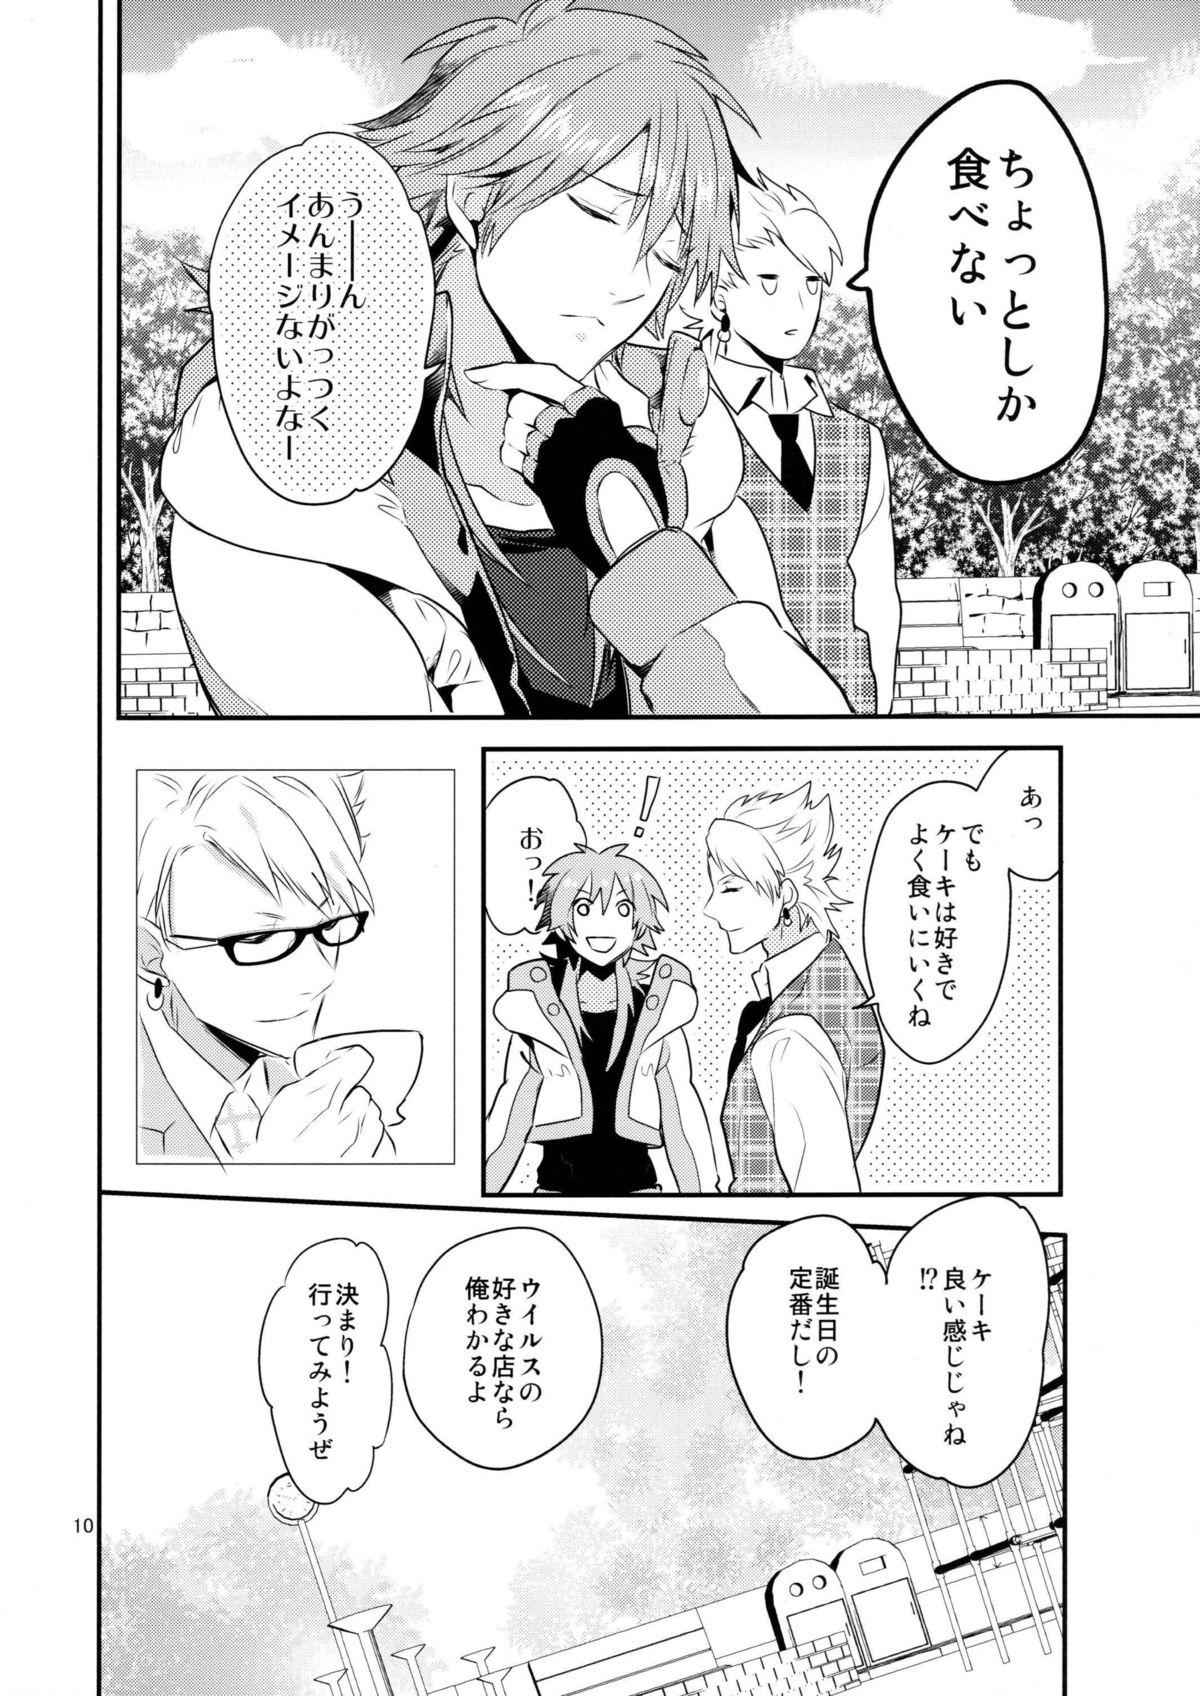 Stripping with love to you - Dramatical murder New - Page 9